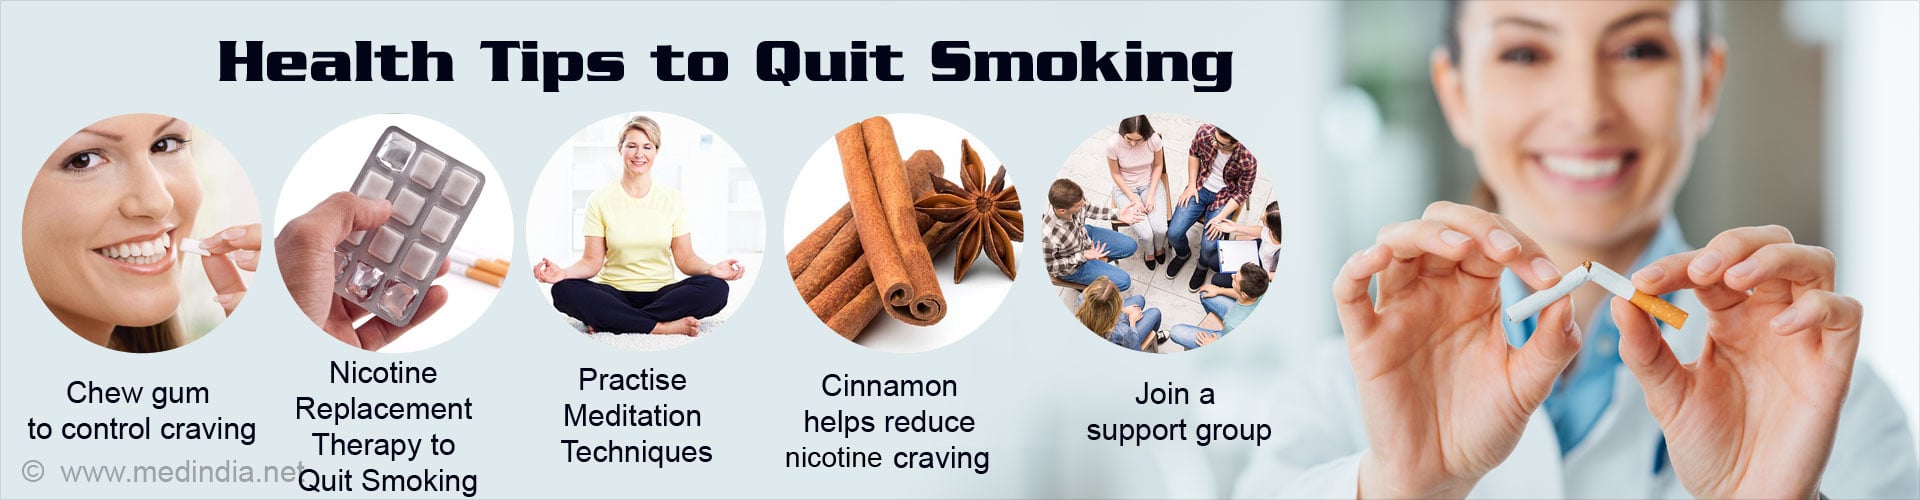 Health Tips to Quit Smoking
- Chew gum to control craving
- Nicotine replacement therapy to quit smoking
- Practise meditation
- Cinnamon helps reduce nicotine craving
- Join a support group